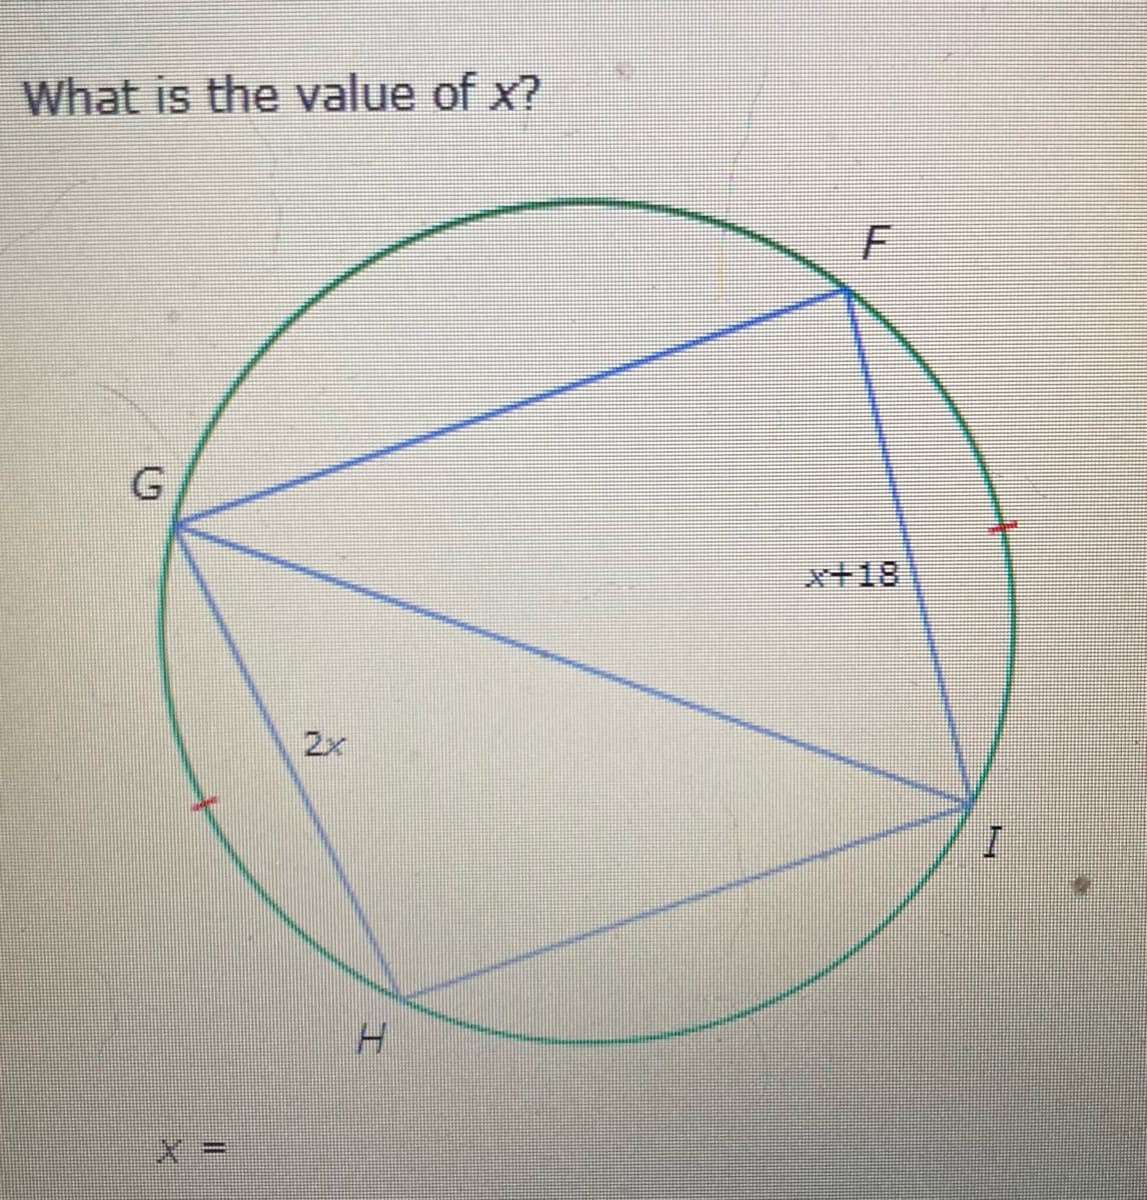 What is the value of x?
H
-
F
x+18
I